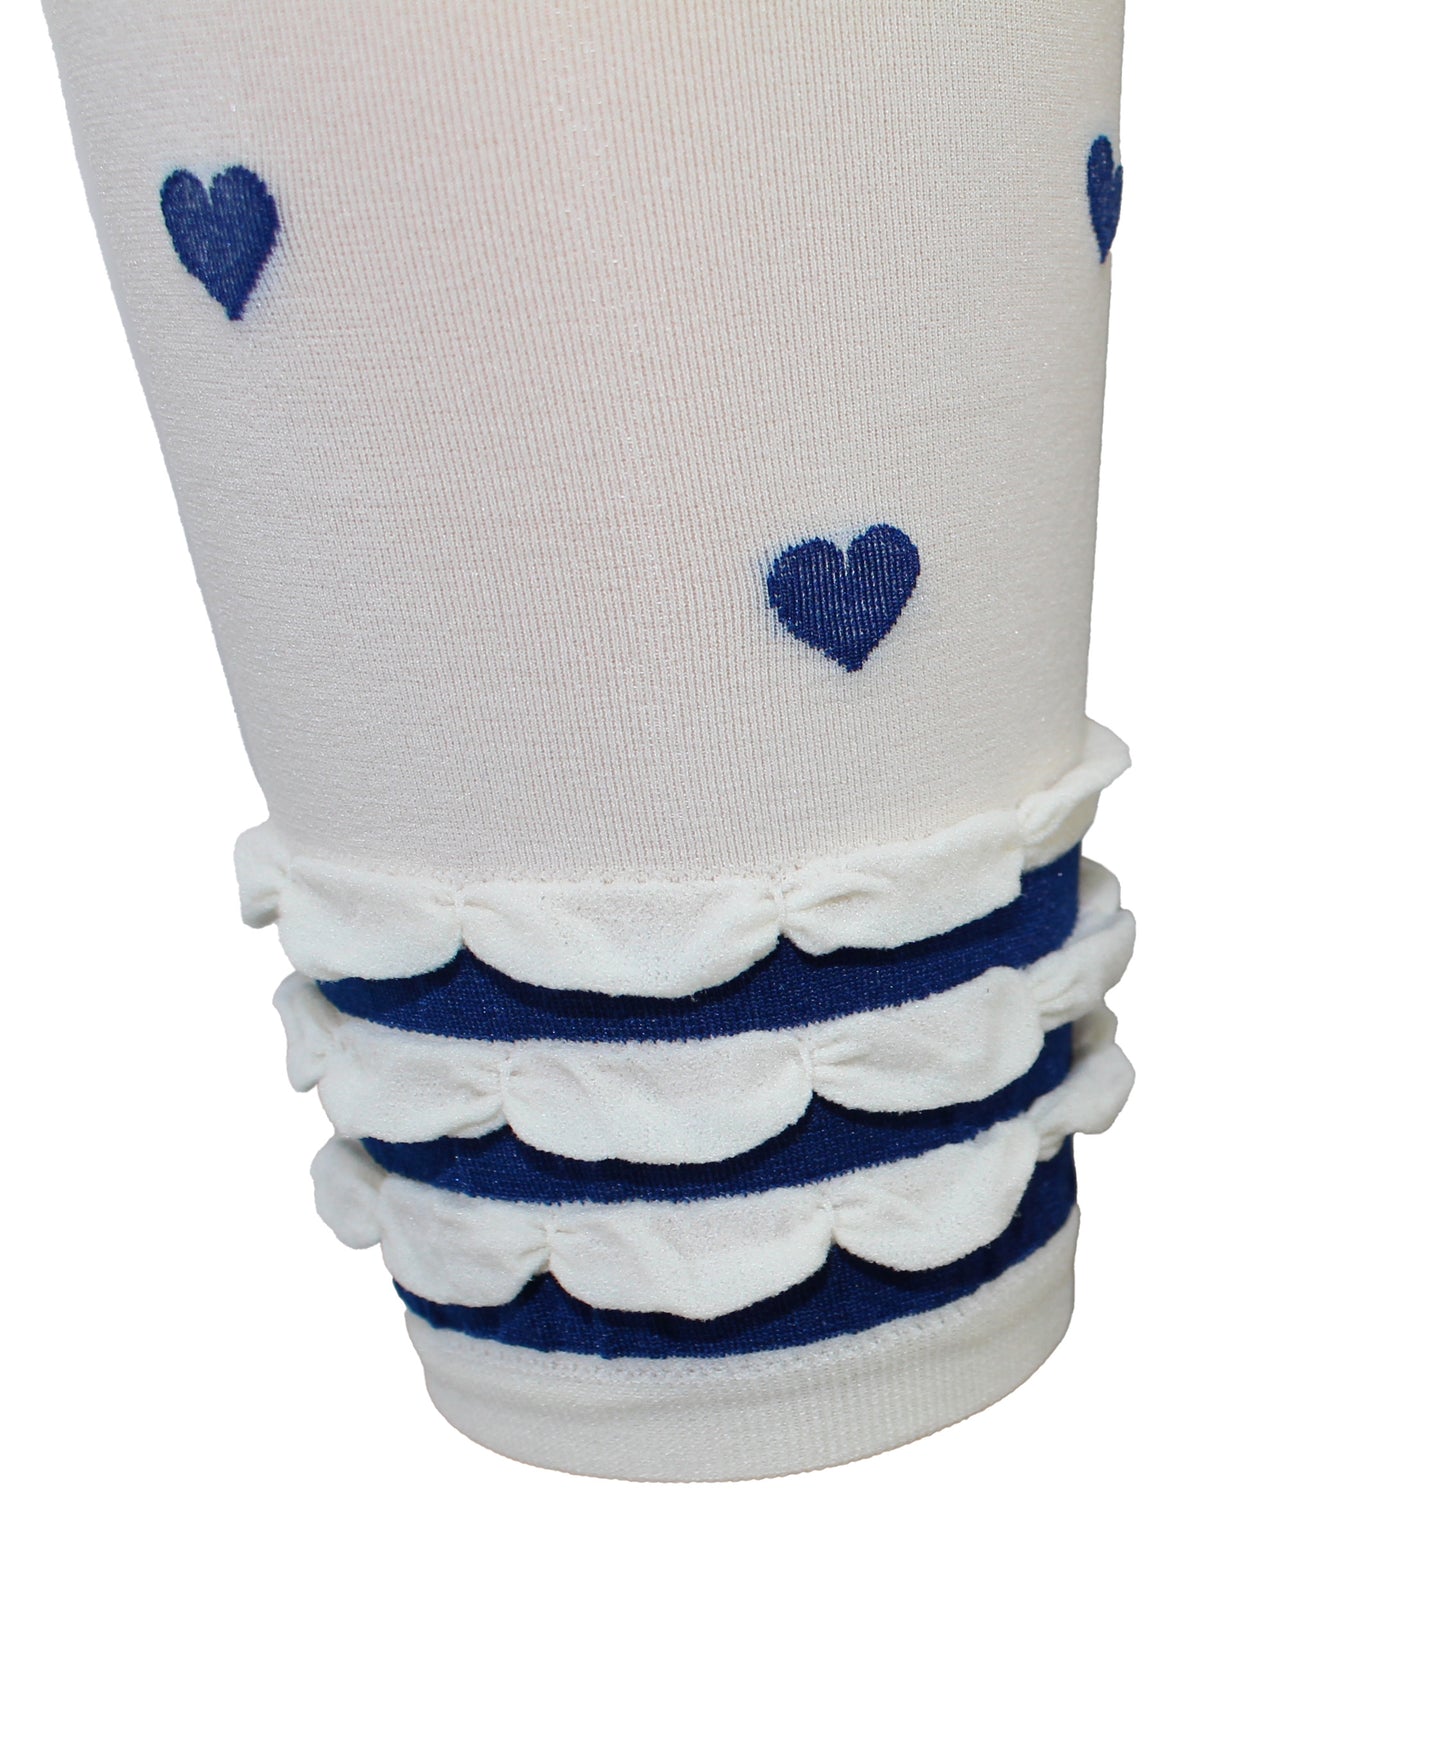 Omsa Fancy Pantacollant - frilled ruched striped cuff in navy and white with heart pattern